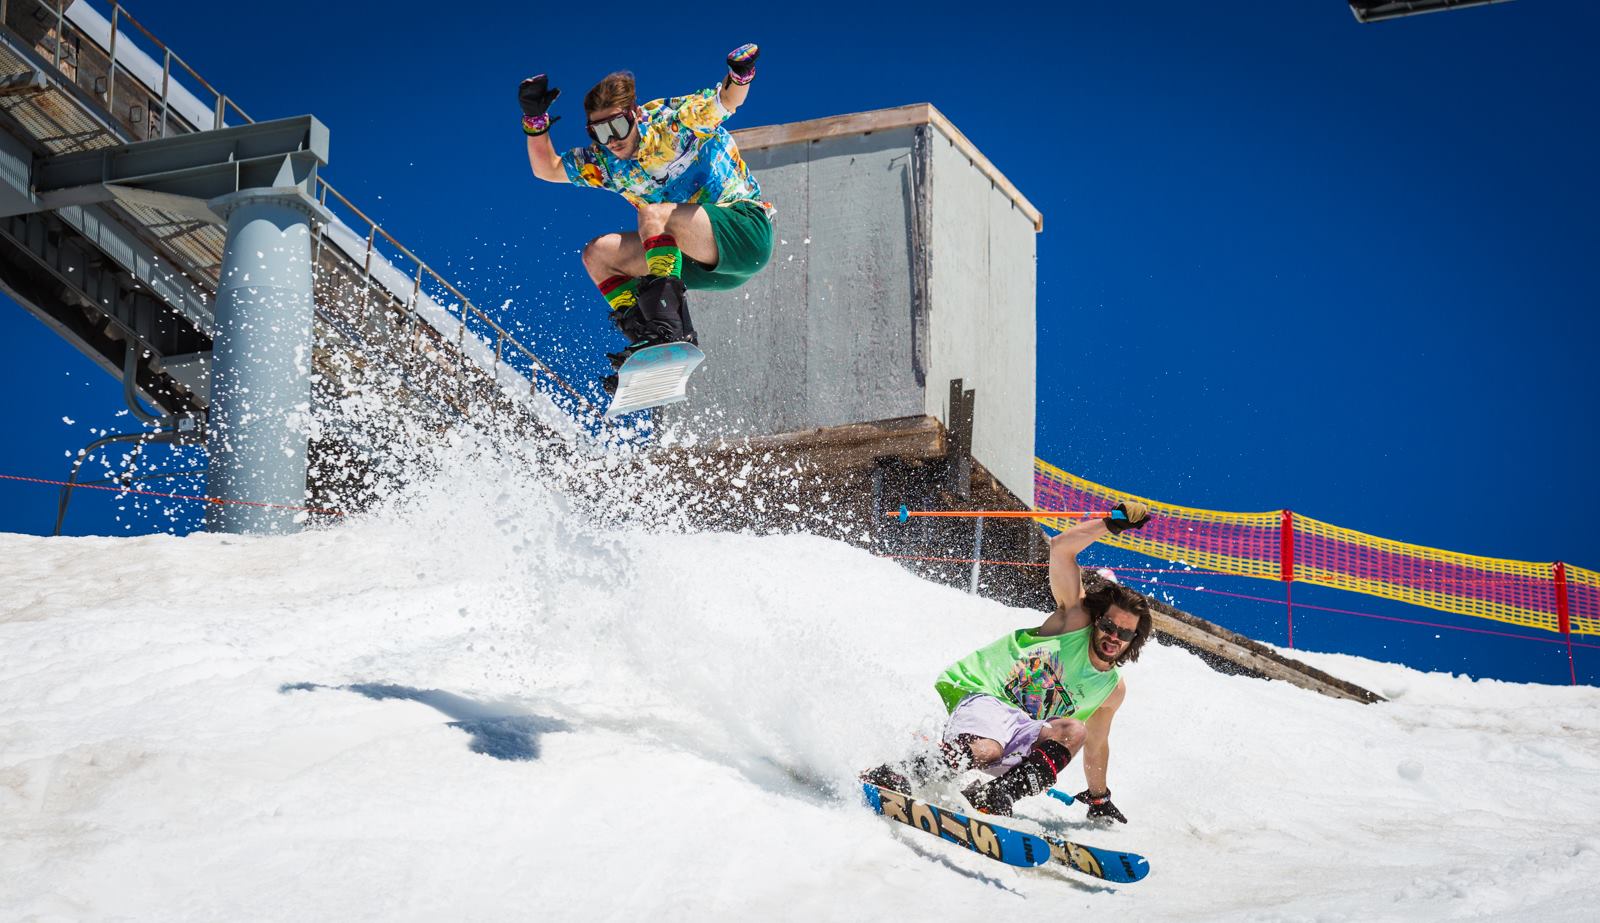 Ripping the Palmer Snowfield at Timberline Lodge, OR this summer. photo: timberline lodge